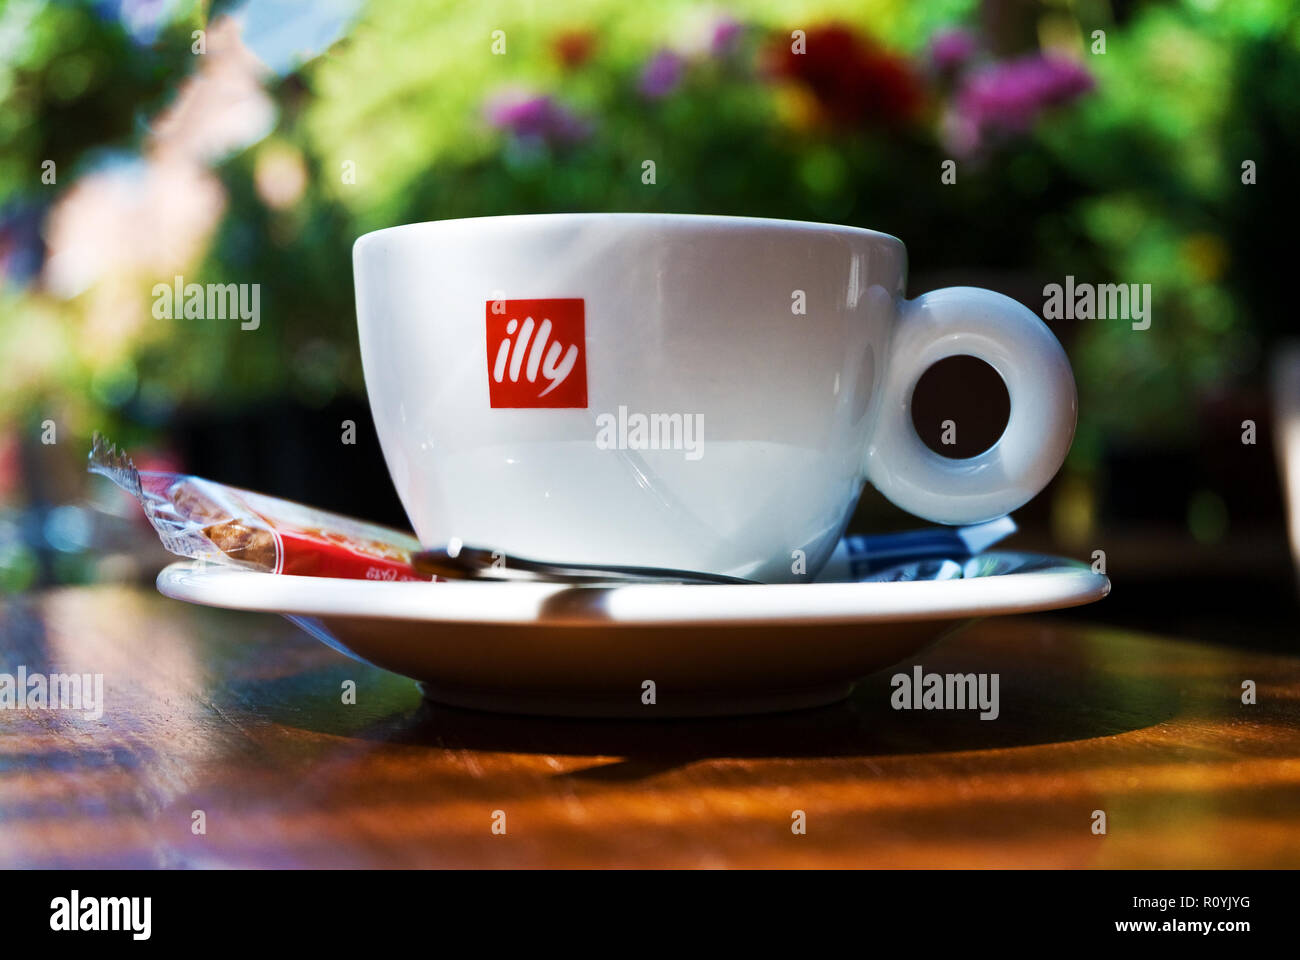 Illy Coffee Cup Stock Photo